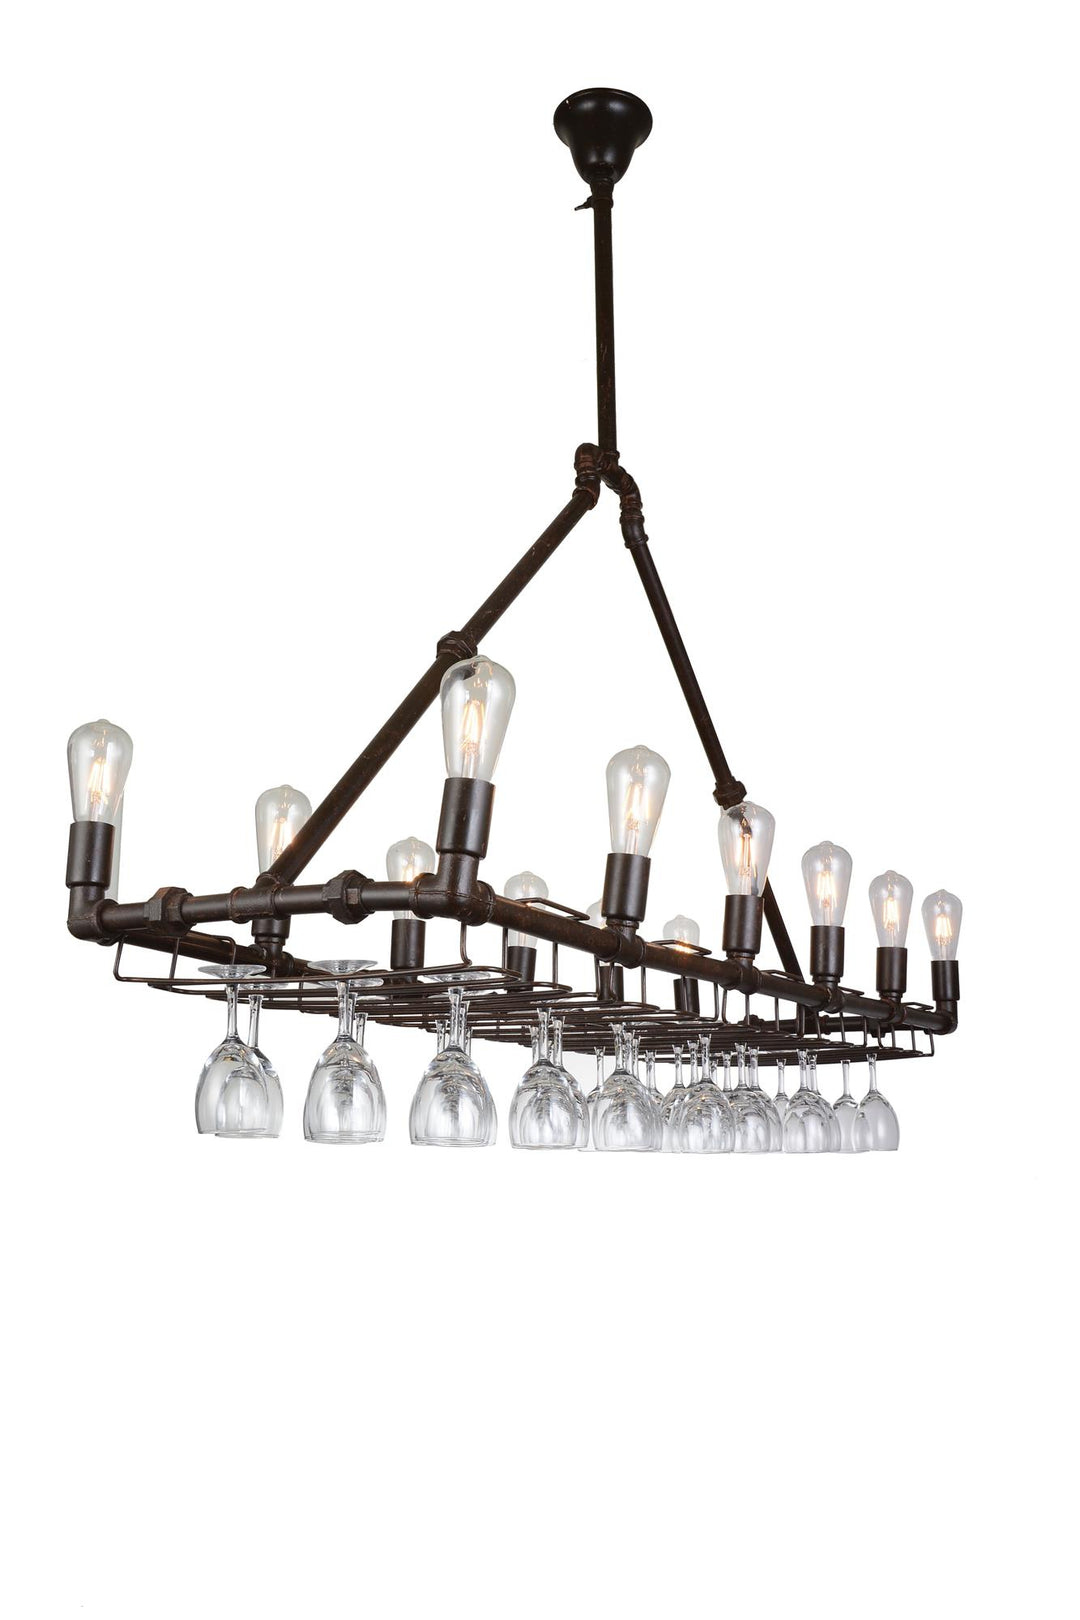 Coln Ceiling Pendant Lamp with 10 Light Fixture - Coffee